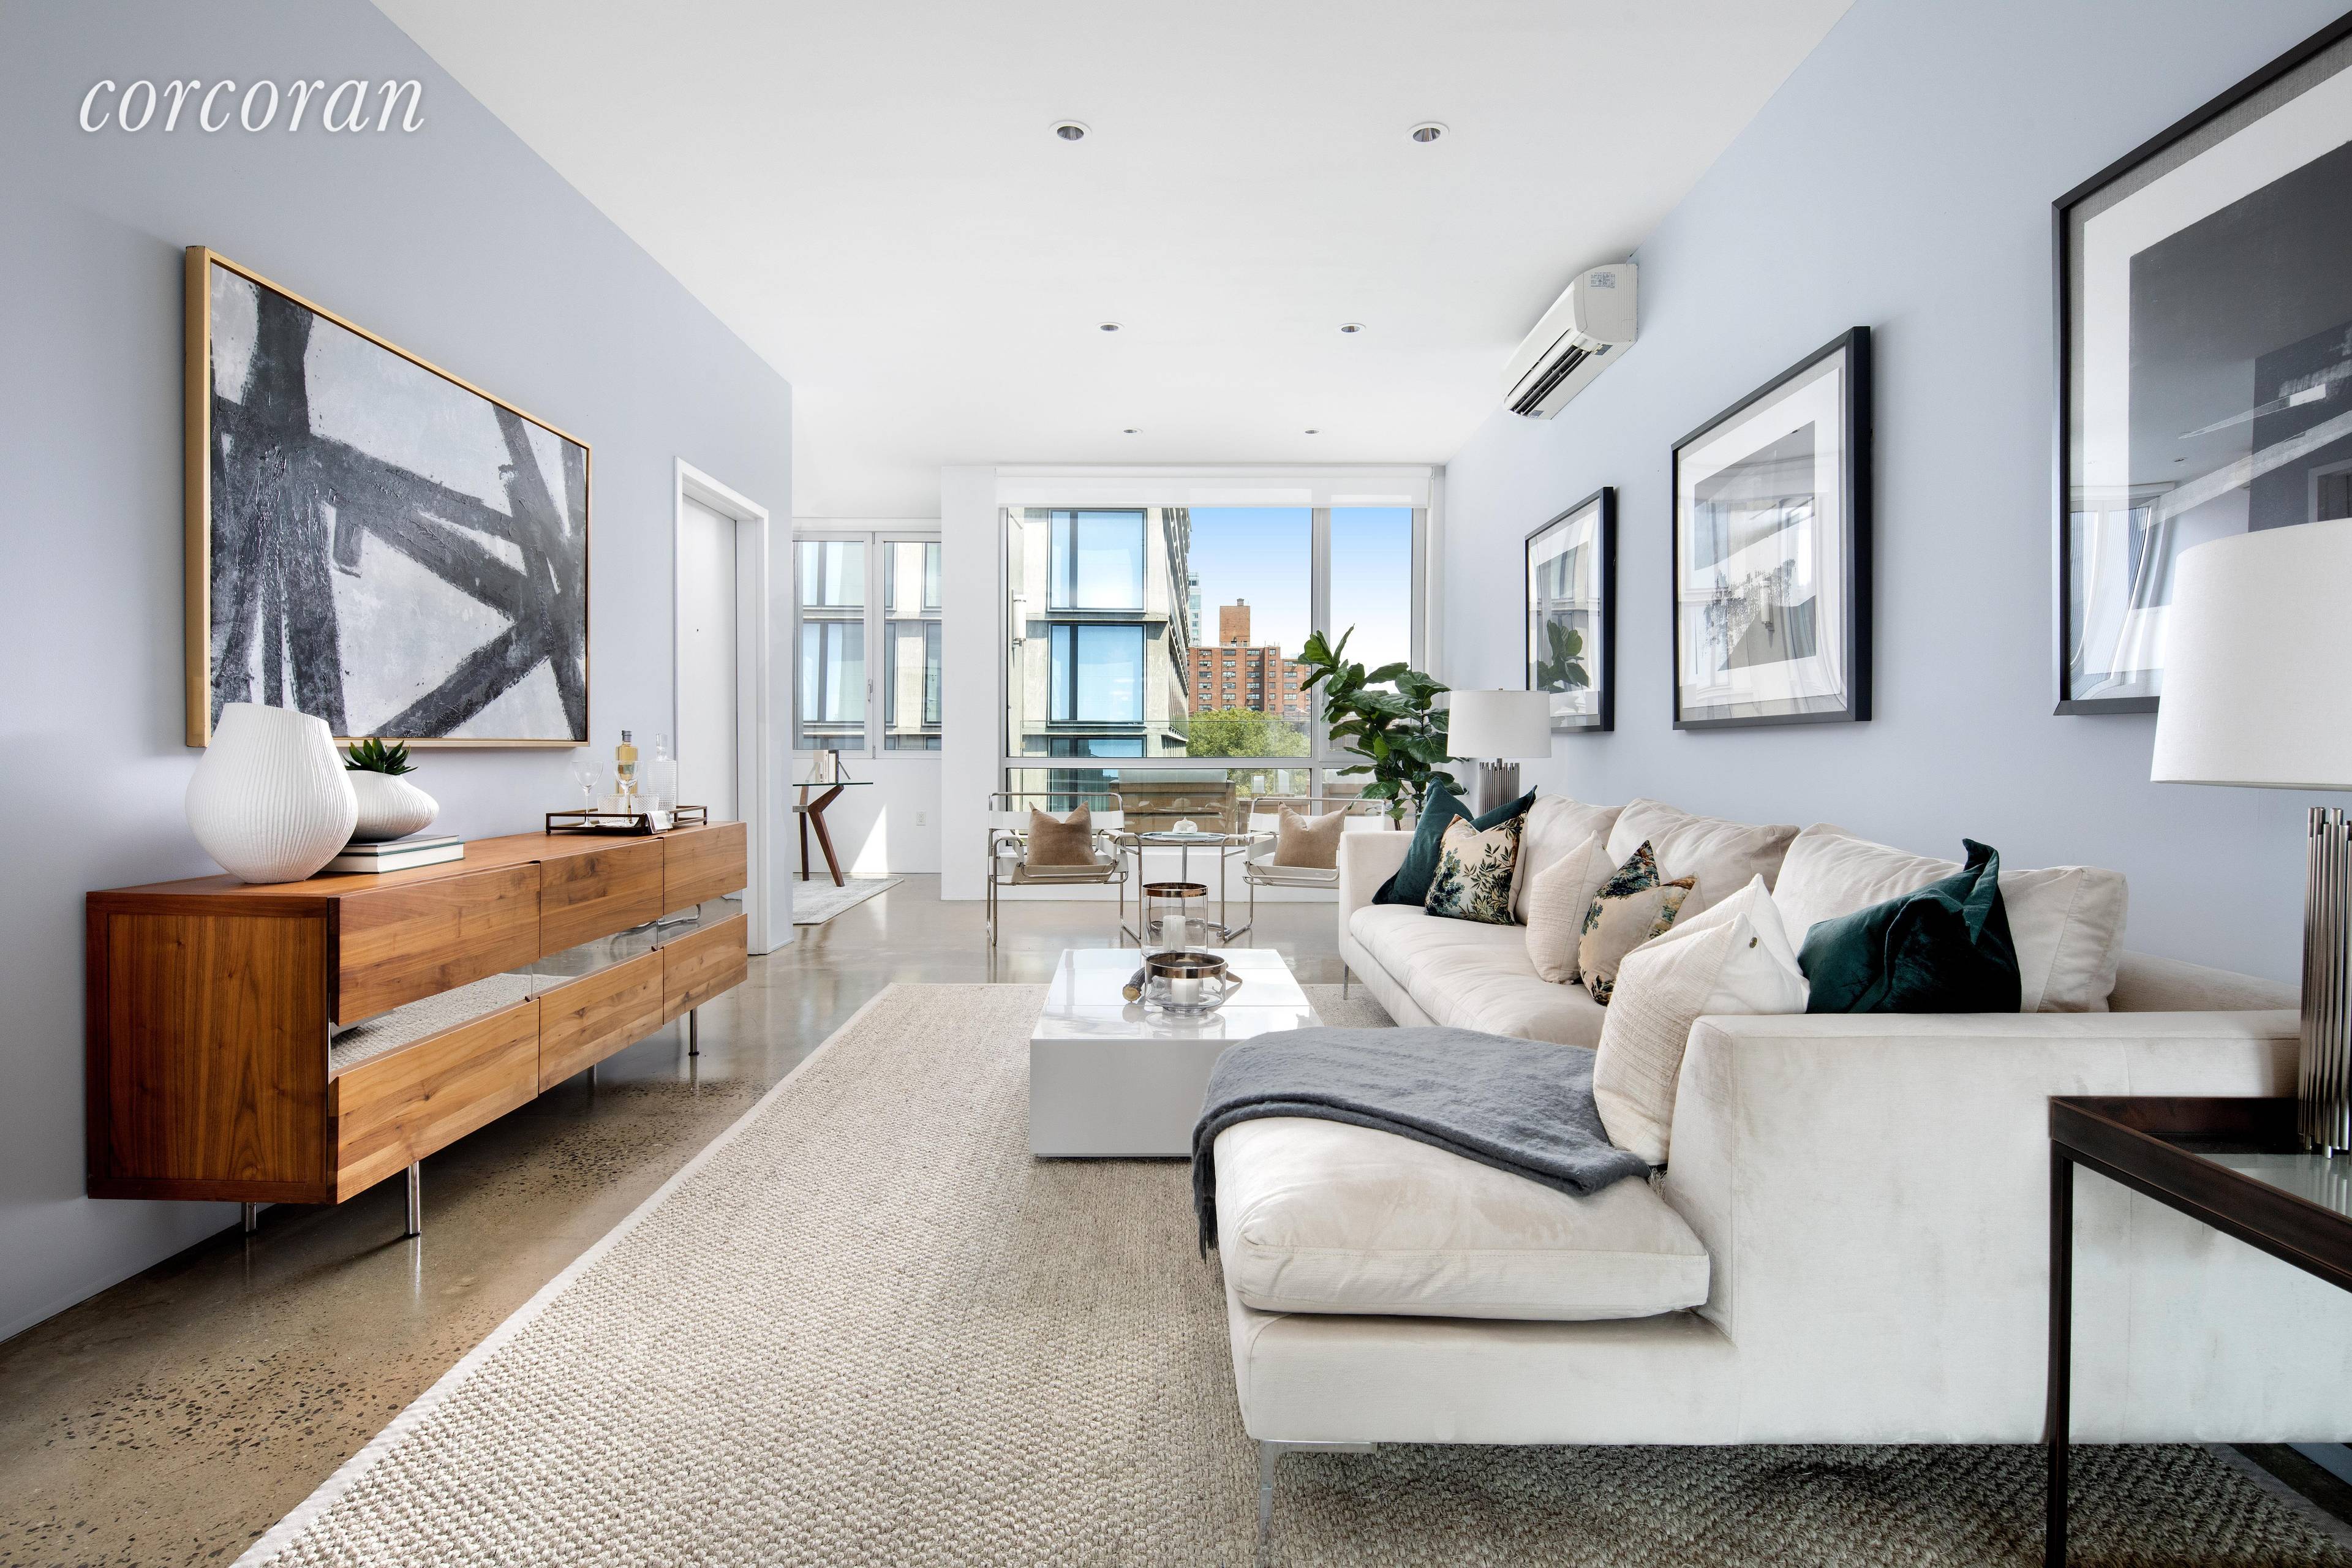 This stunning, duplex penthouse is the last sponsor unit for sale at 255 Bowery Street, which is centrally located at the vibrant intersection of Nolita, NoHo, SoHo, Lower East Side, ...